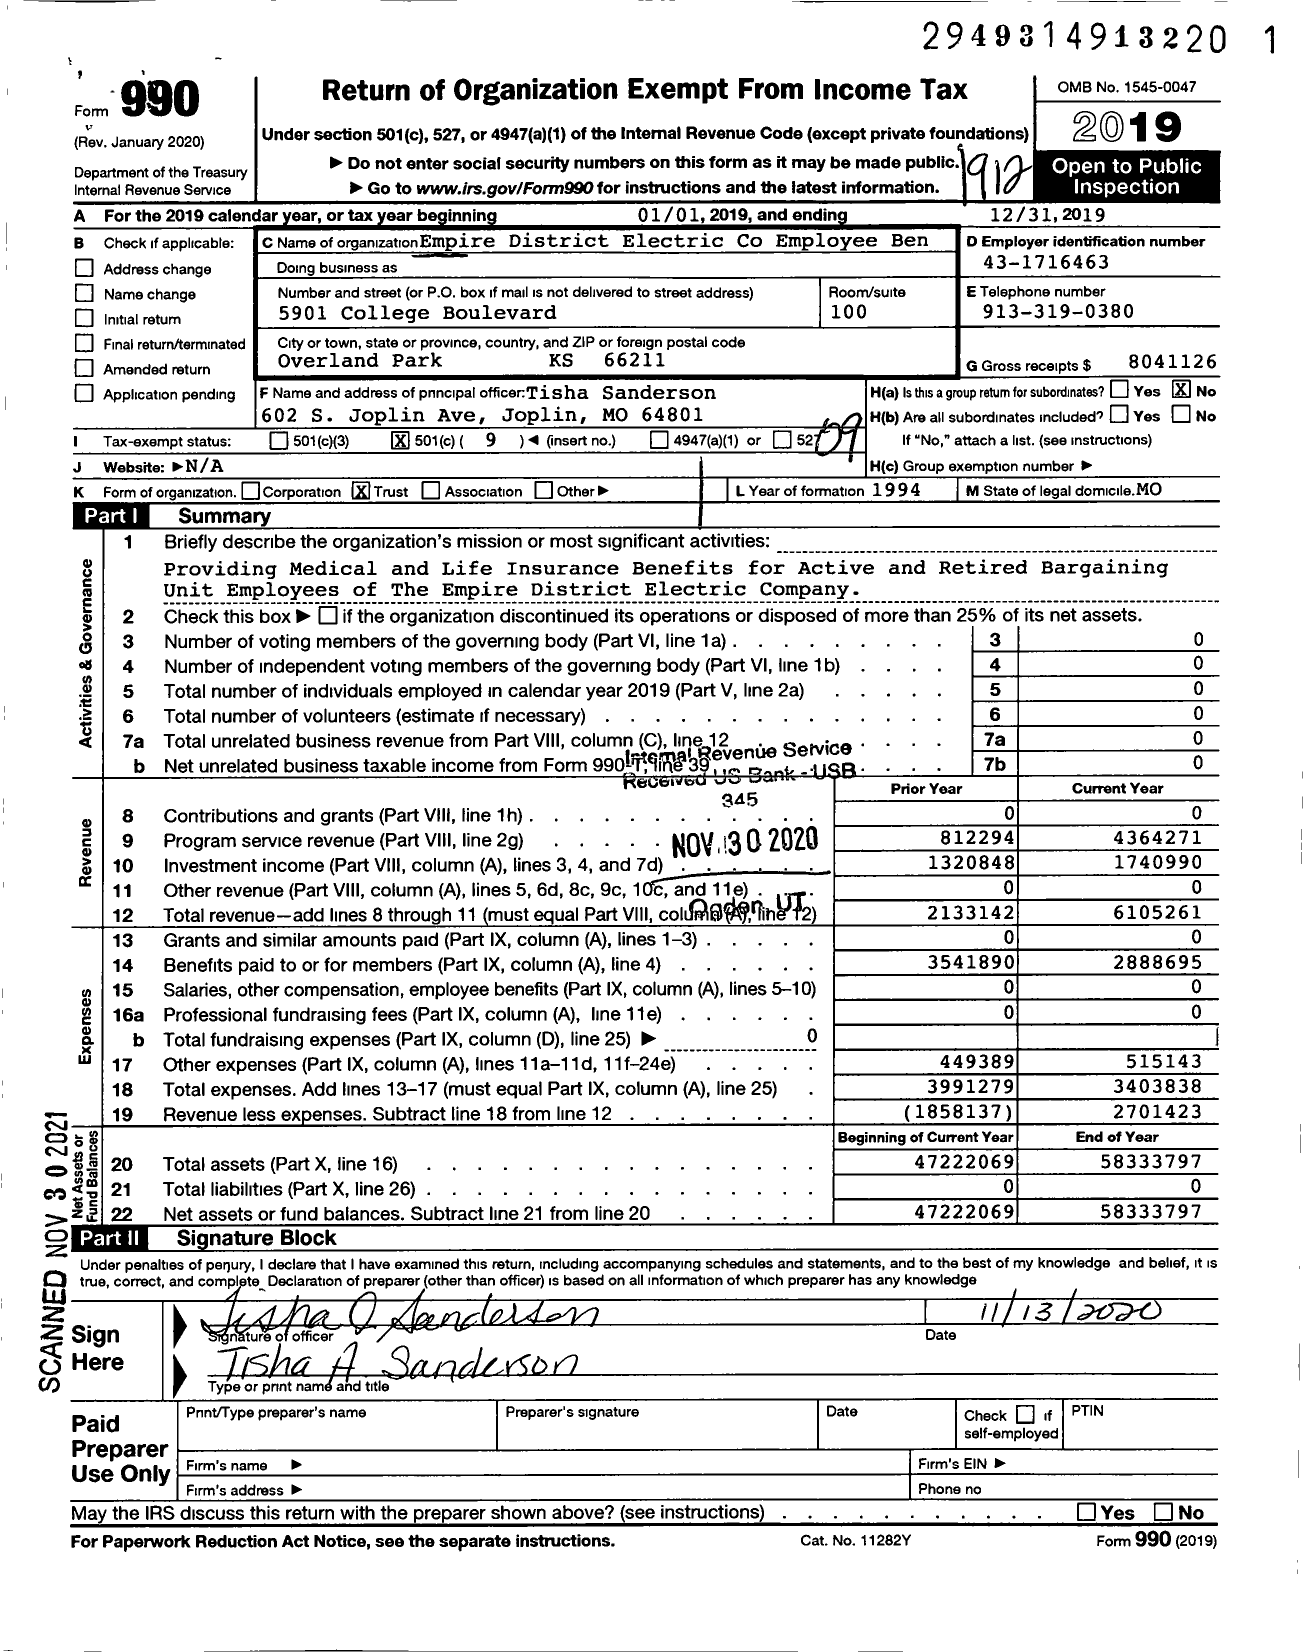 Image of first page of 2019 Form 990O for Empire District Electric Company Employee Benefit Fund for Bargaining